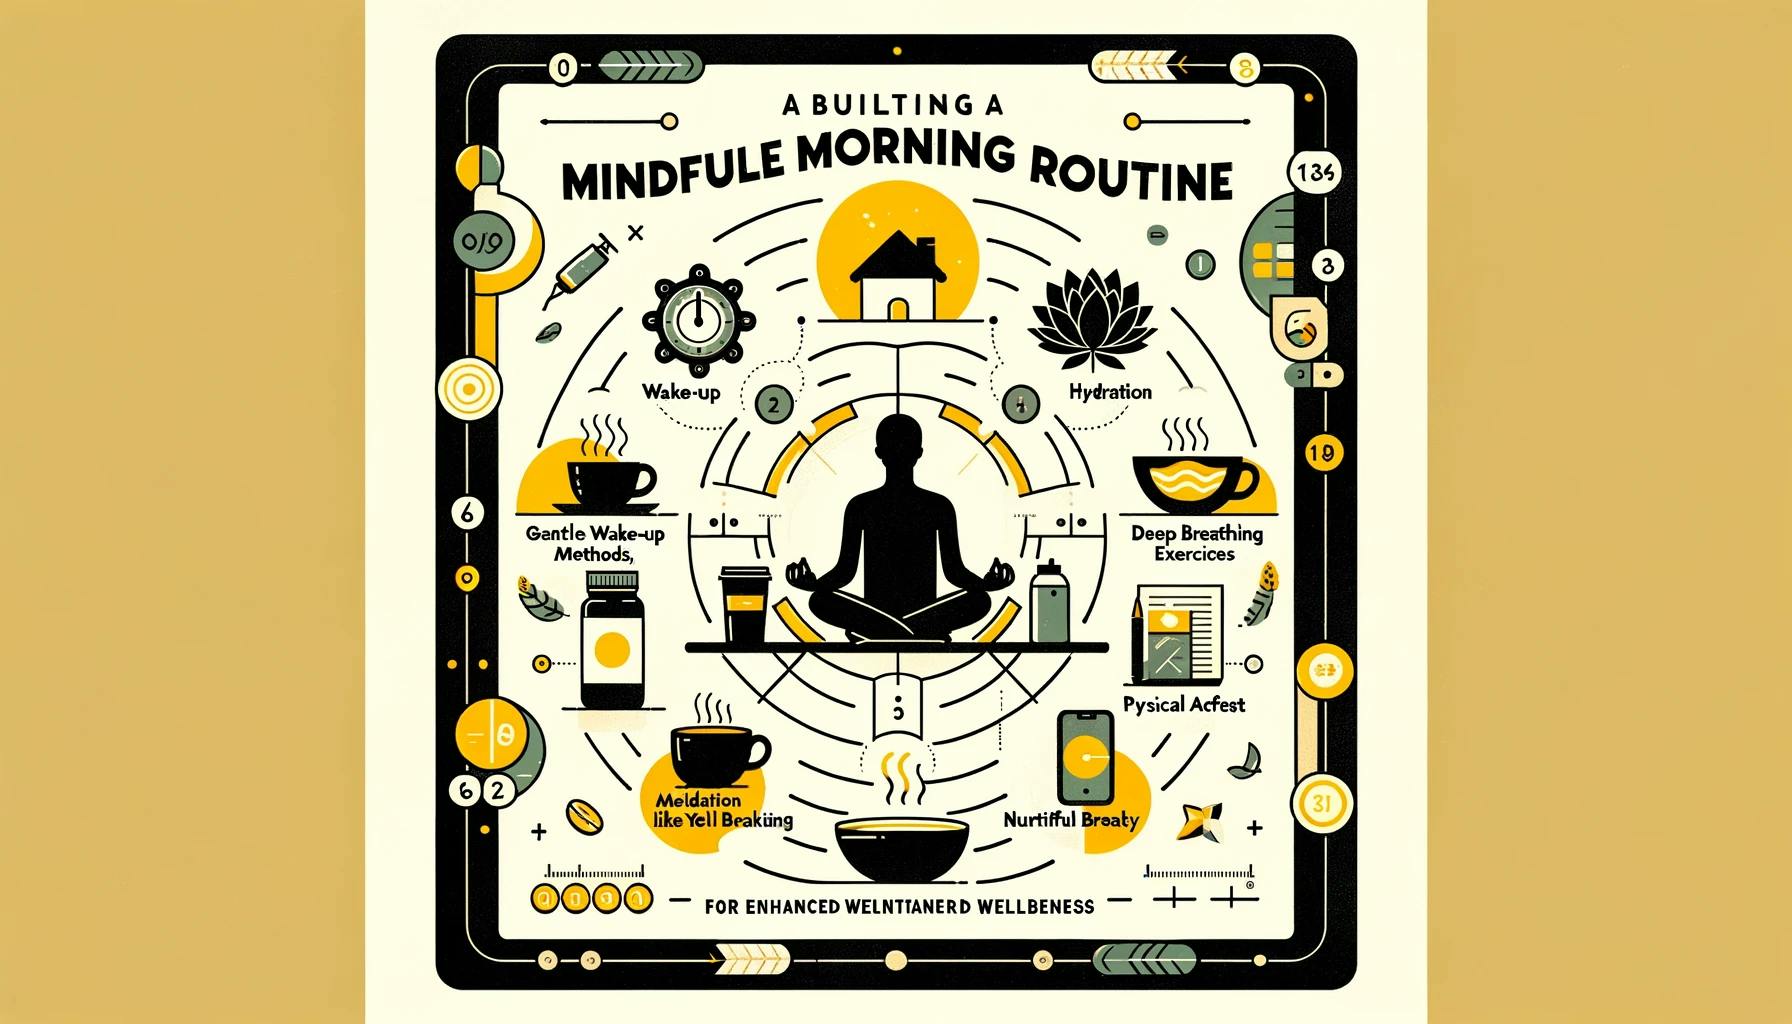 Building a Mindful Morning Routine for Enhanced Wellbeing